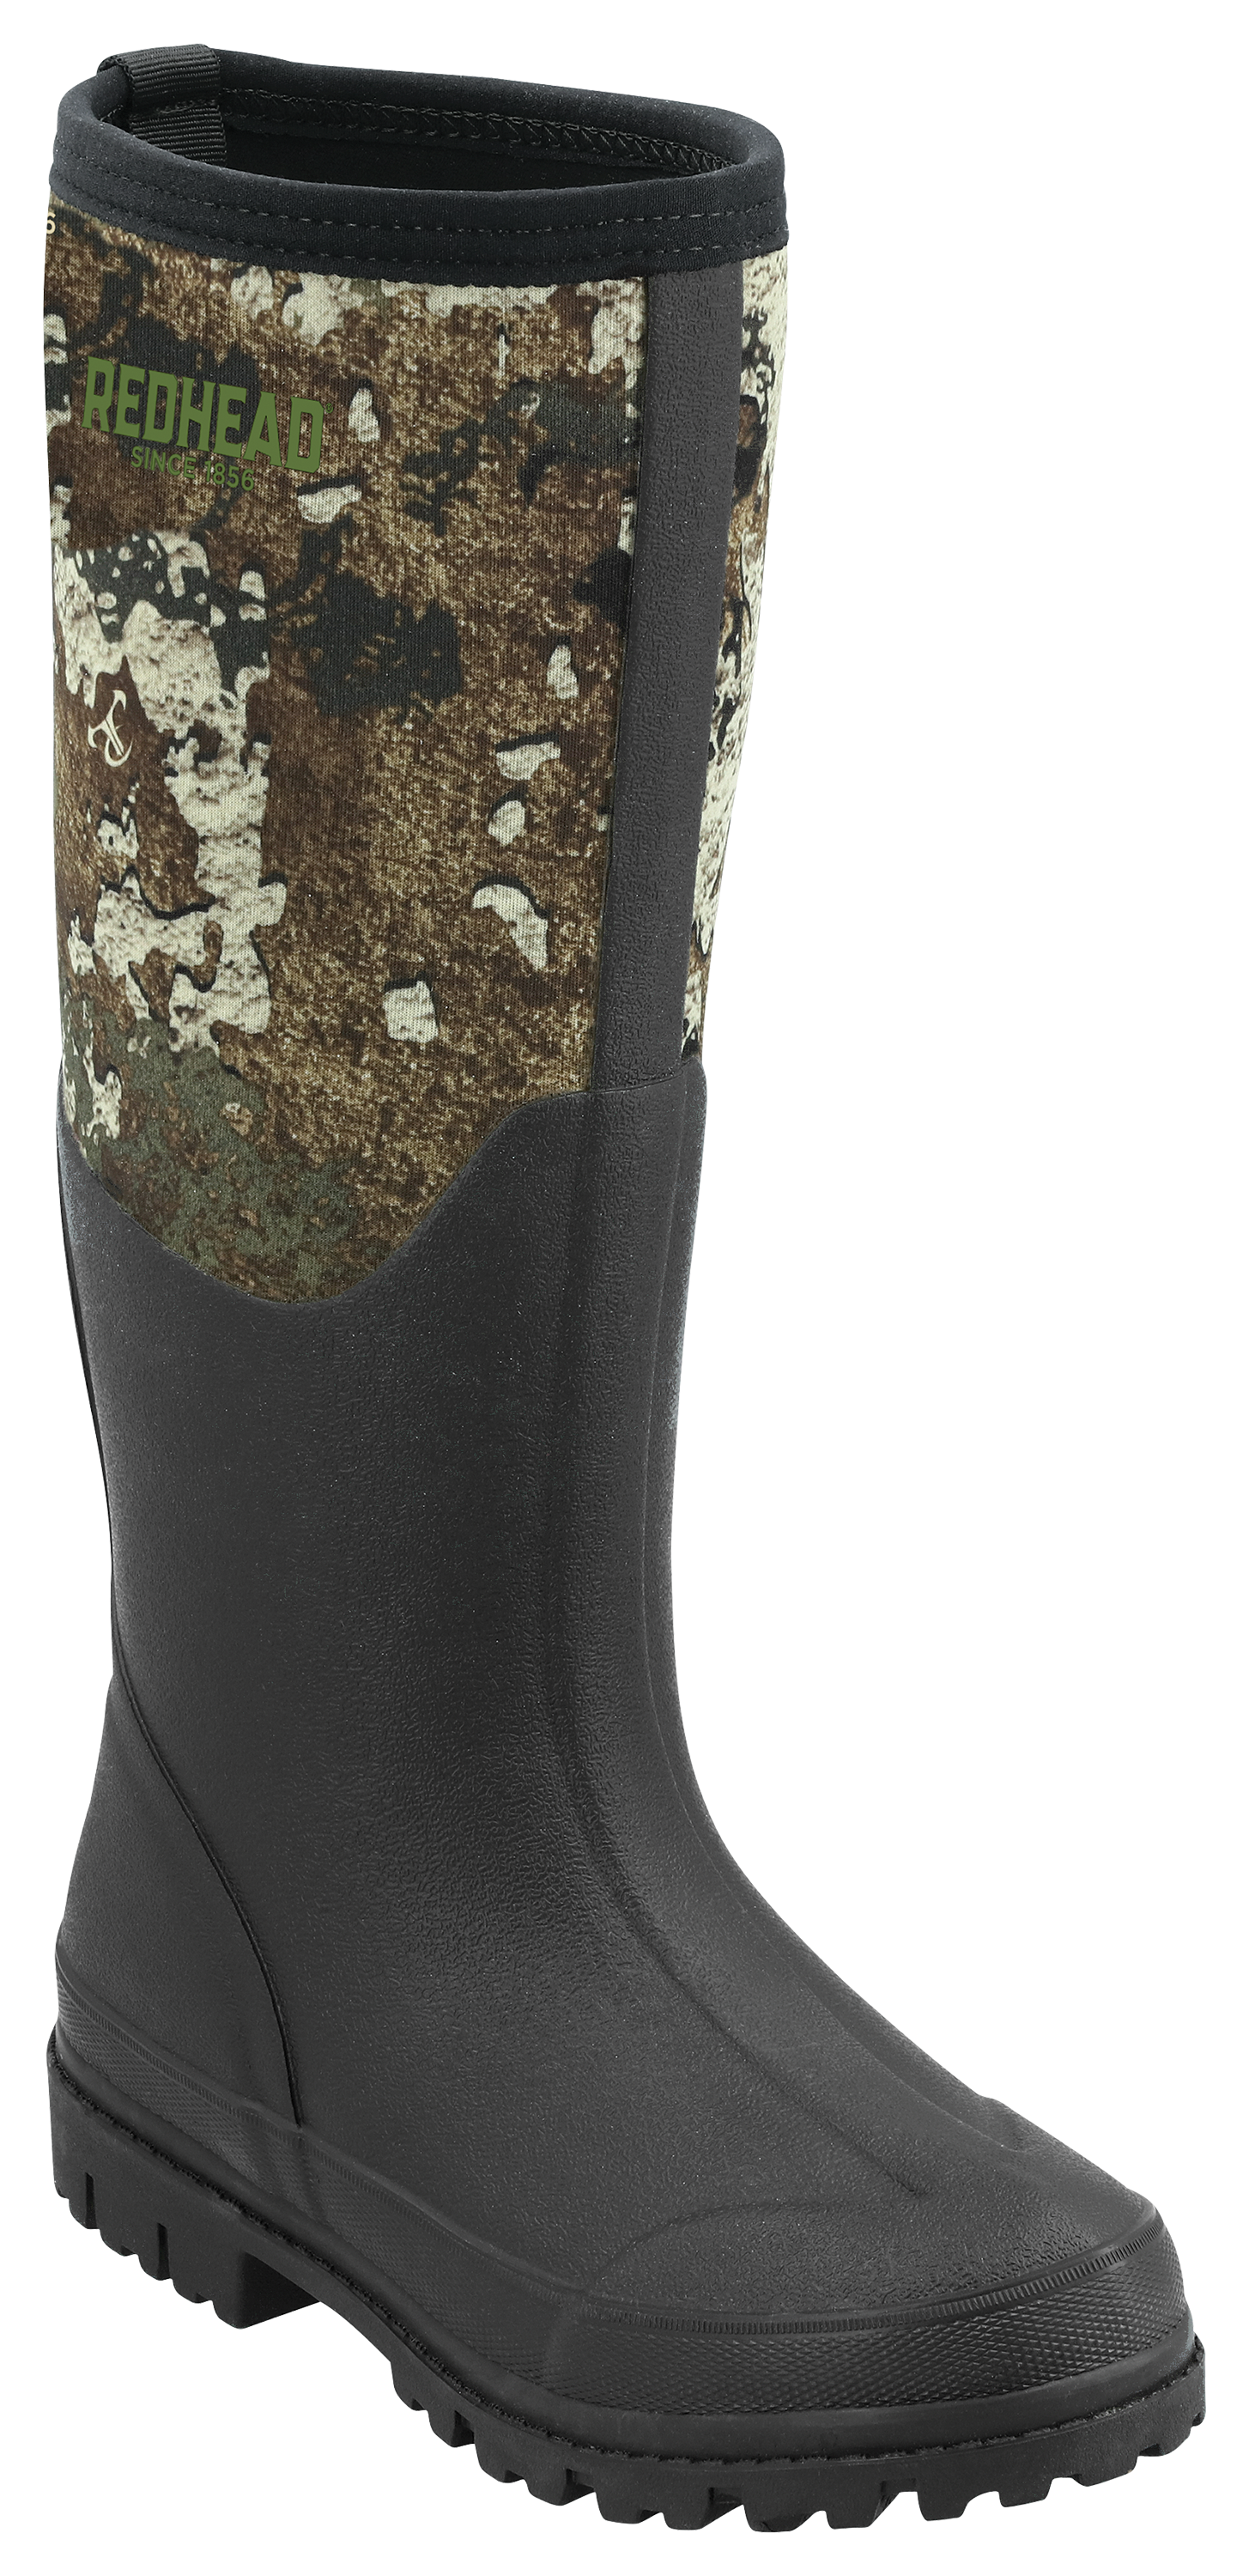 Redhead Camo Utility Waterproof Rubber Boots for Youth - Brown/TrueTimber Strata - 3 Kids